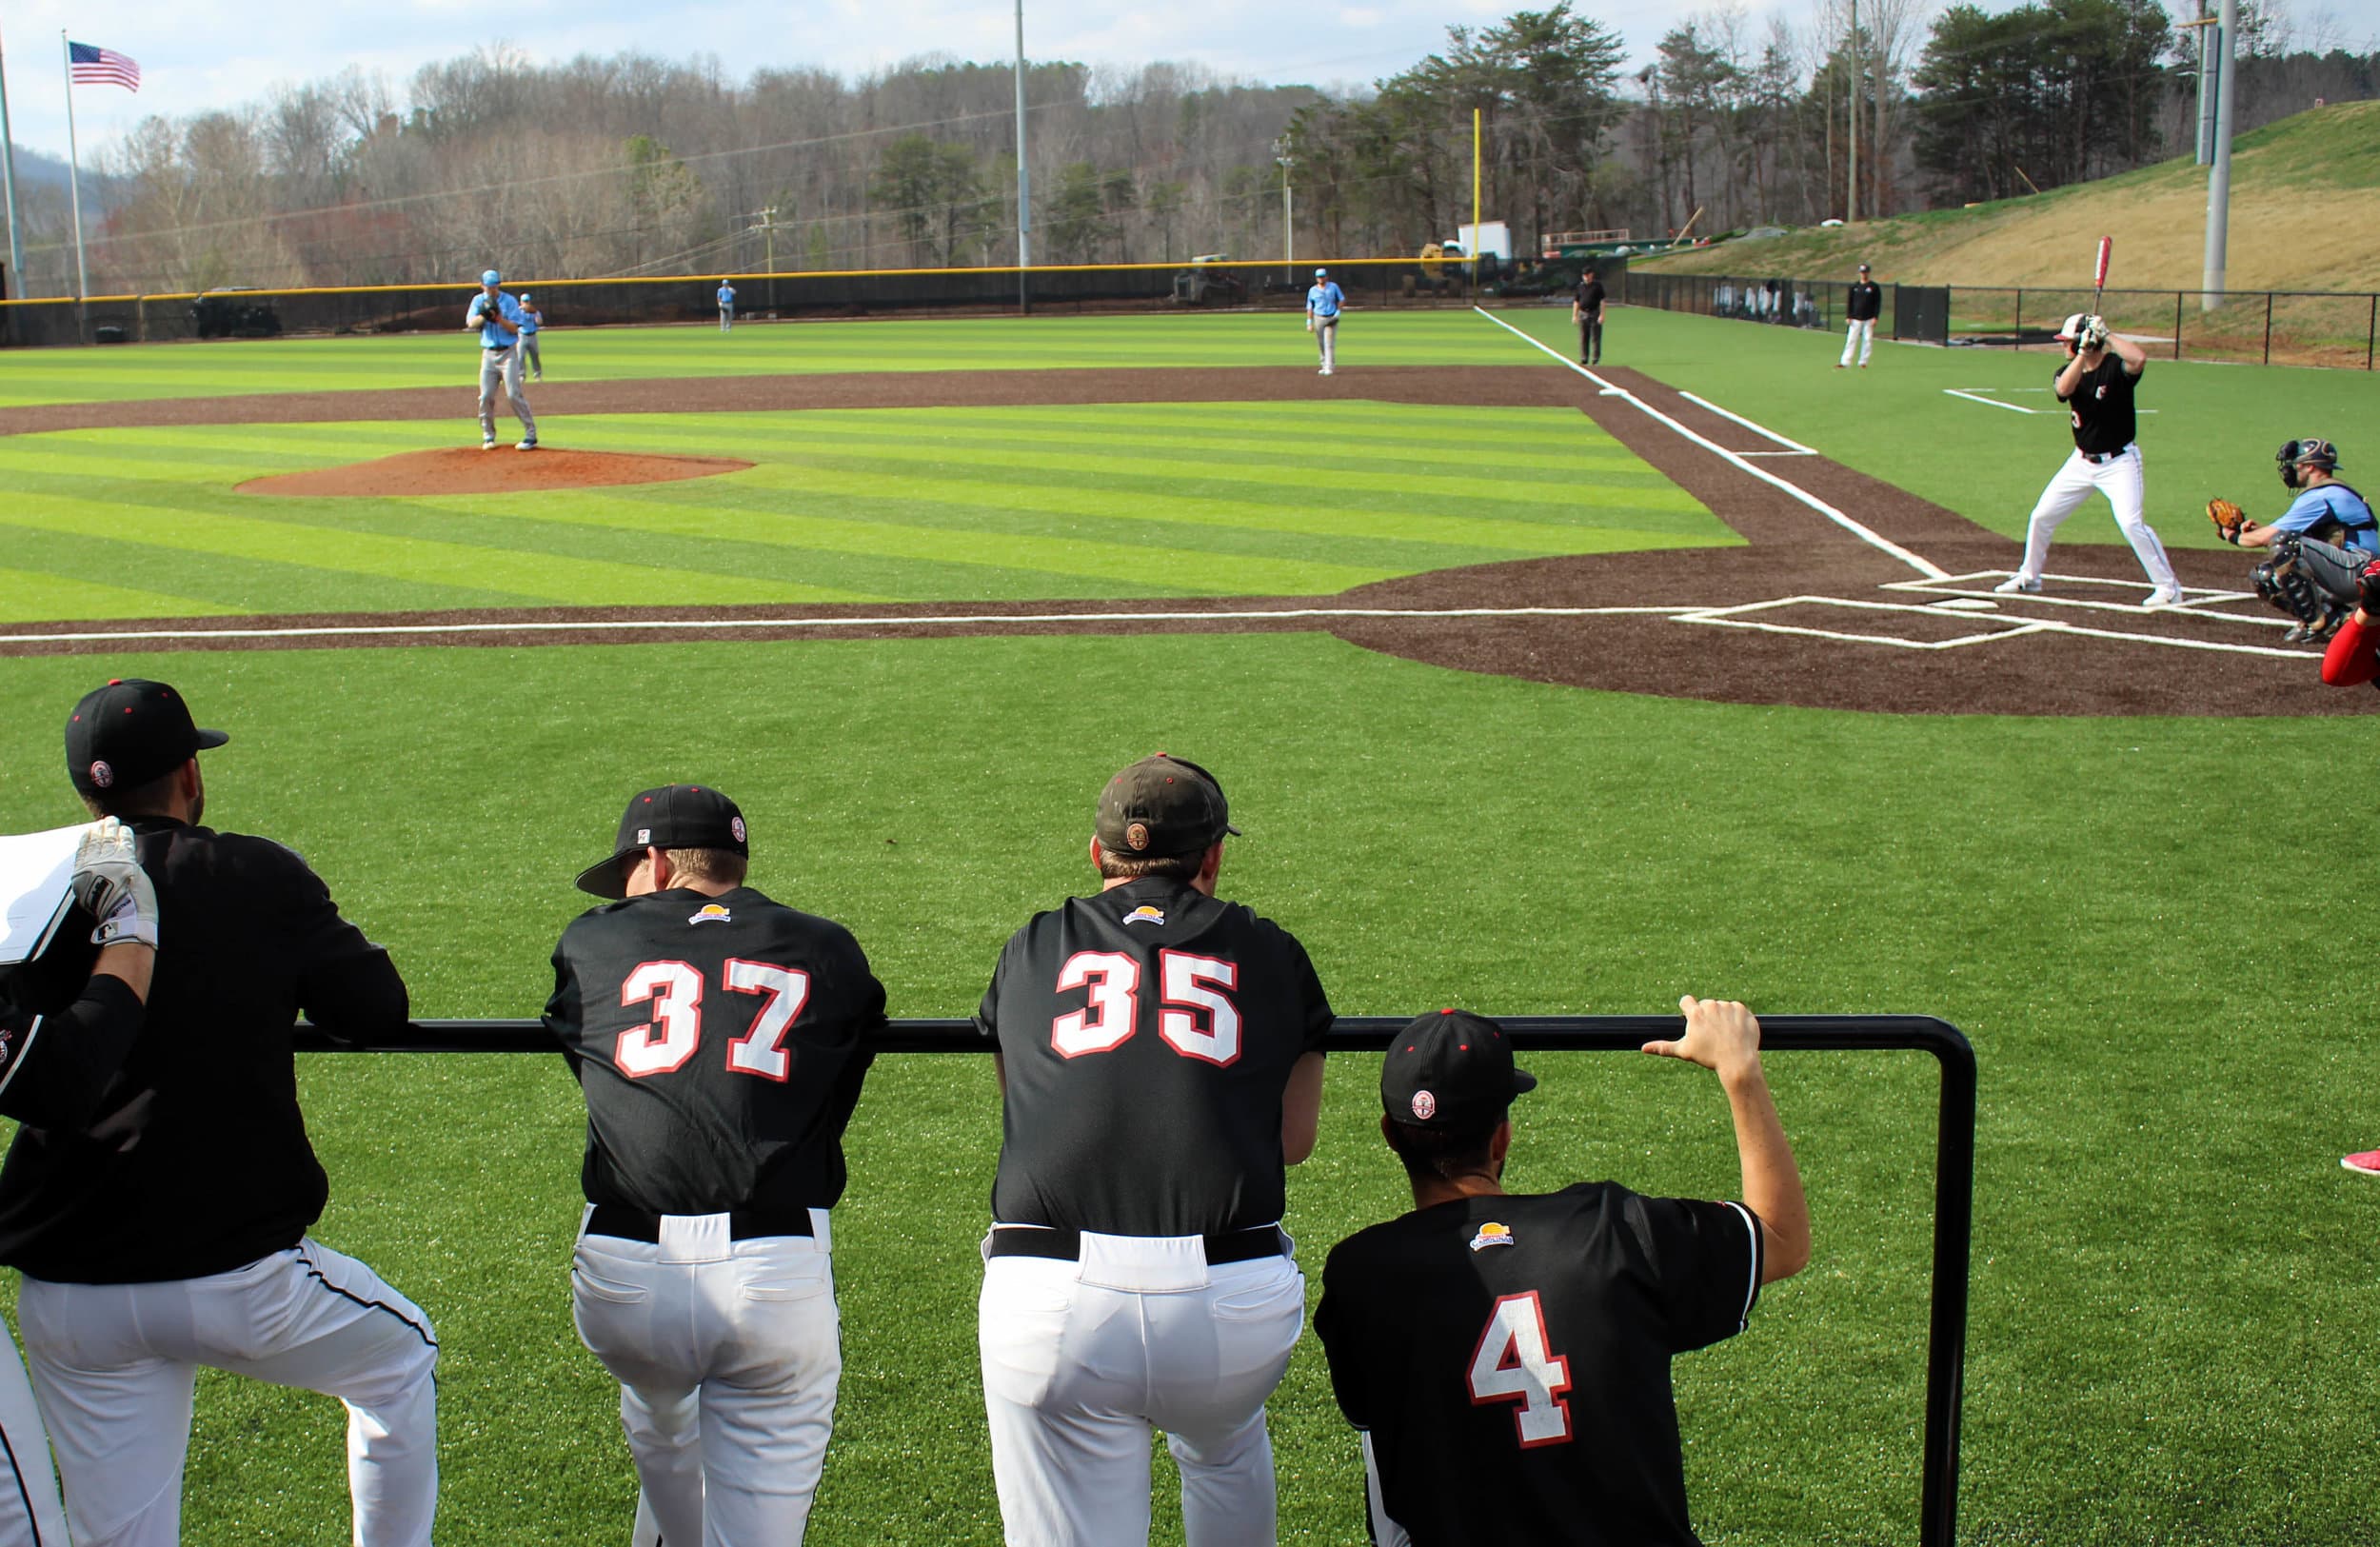 Ethan Struthers (37), Blake Hamilton (35)&nbsp;and Canaan Cropper (4) look on in support as Ryan Brown (3) is up to bat.